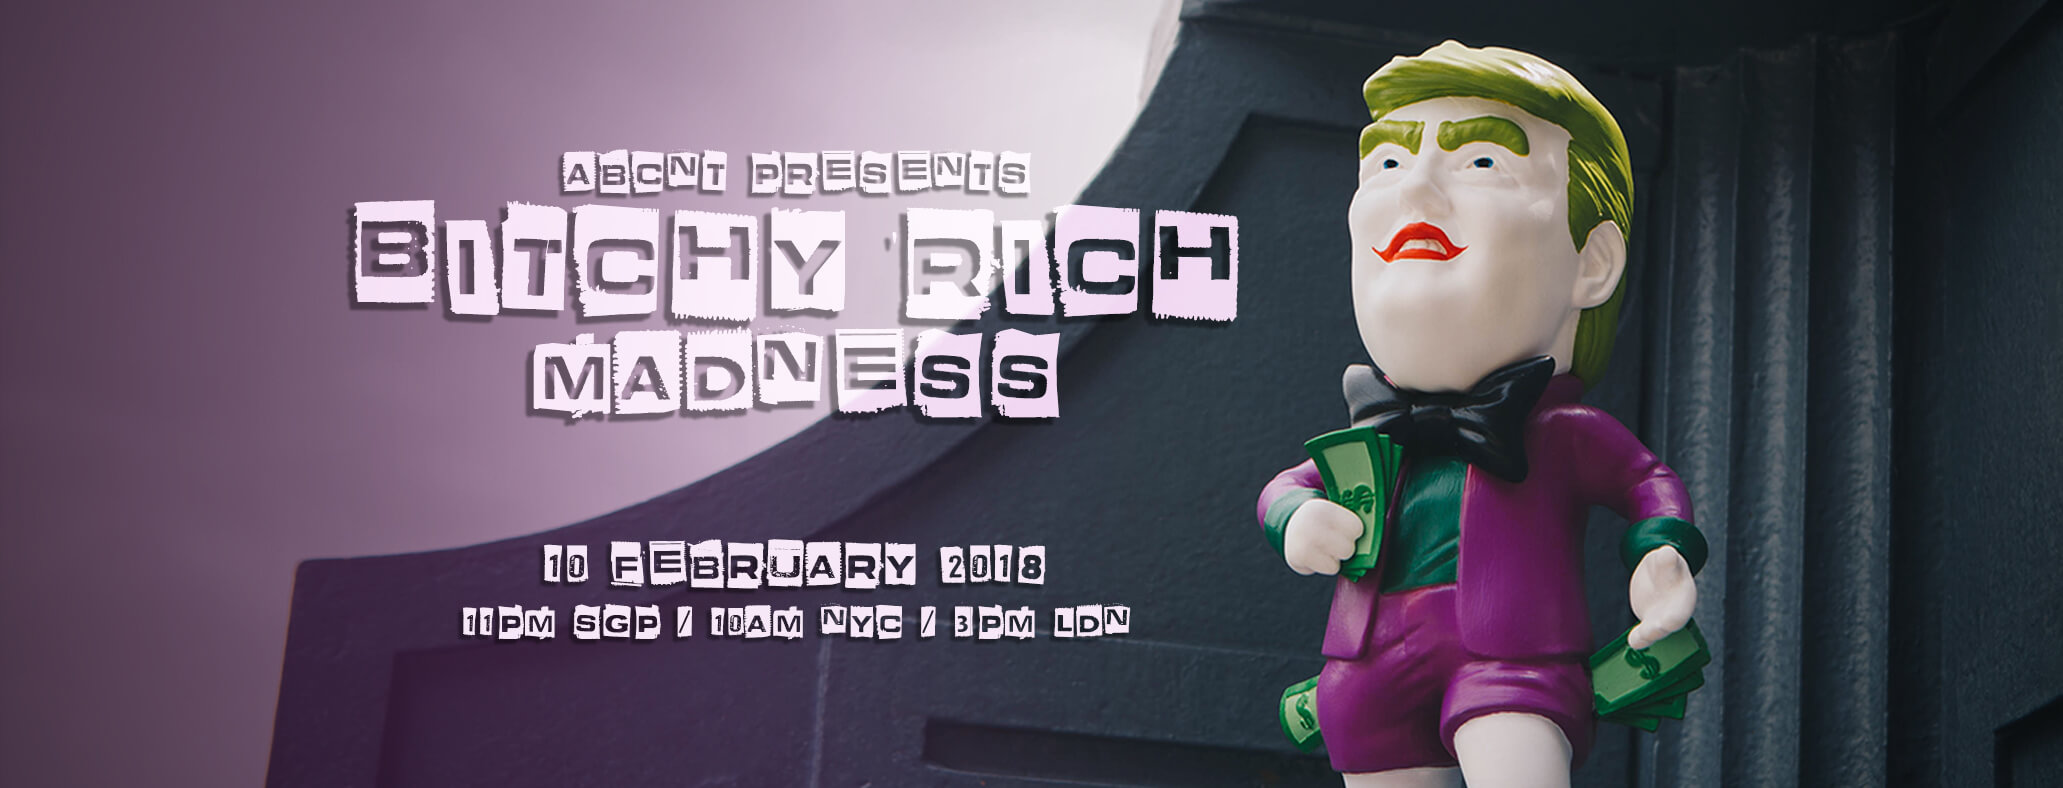 Mighty Jaxx Bitchy Rich Madness Donald Trump By ABCNT Promo Card The Joker Rare